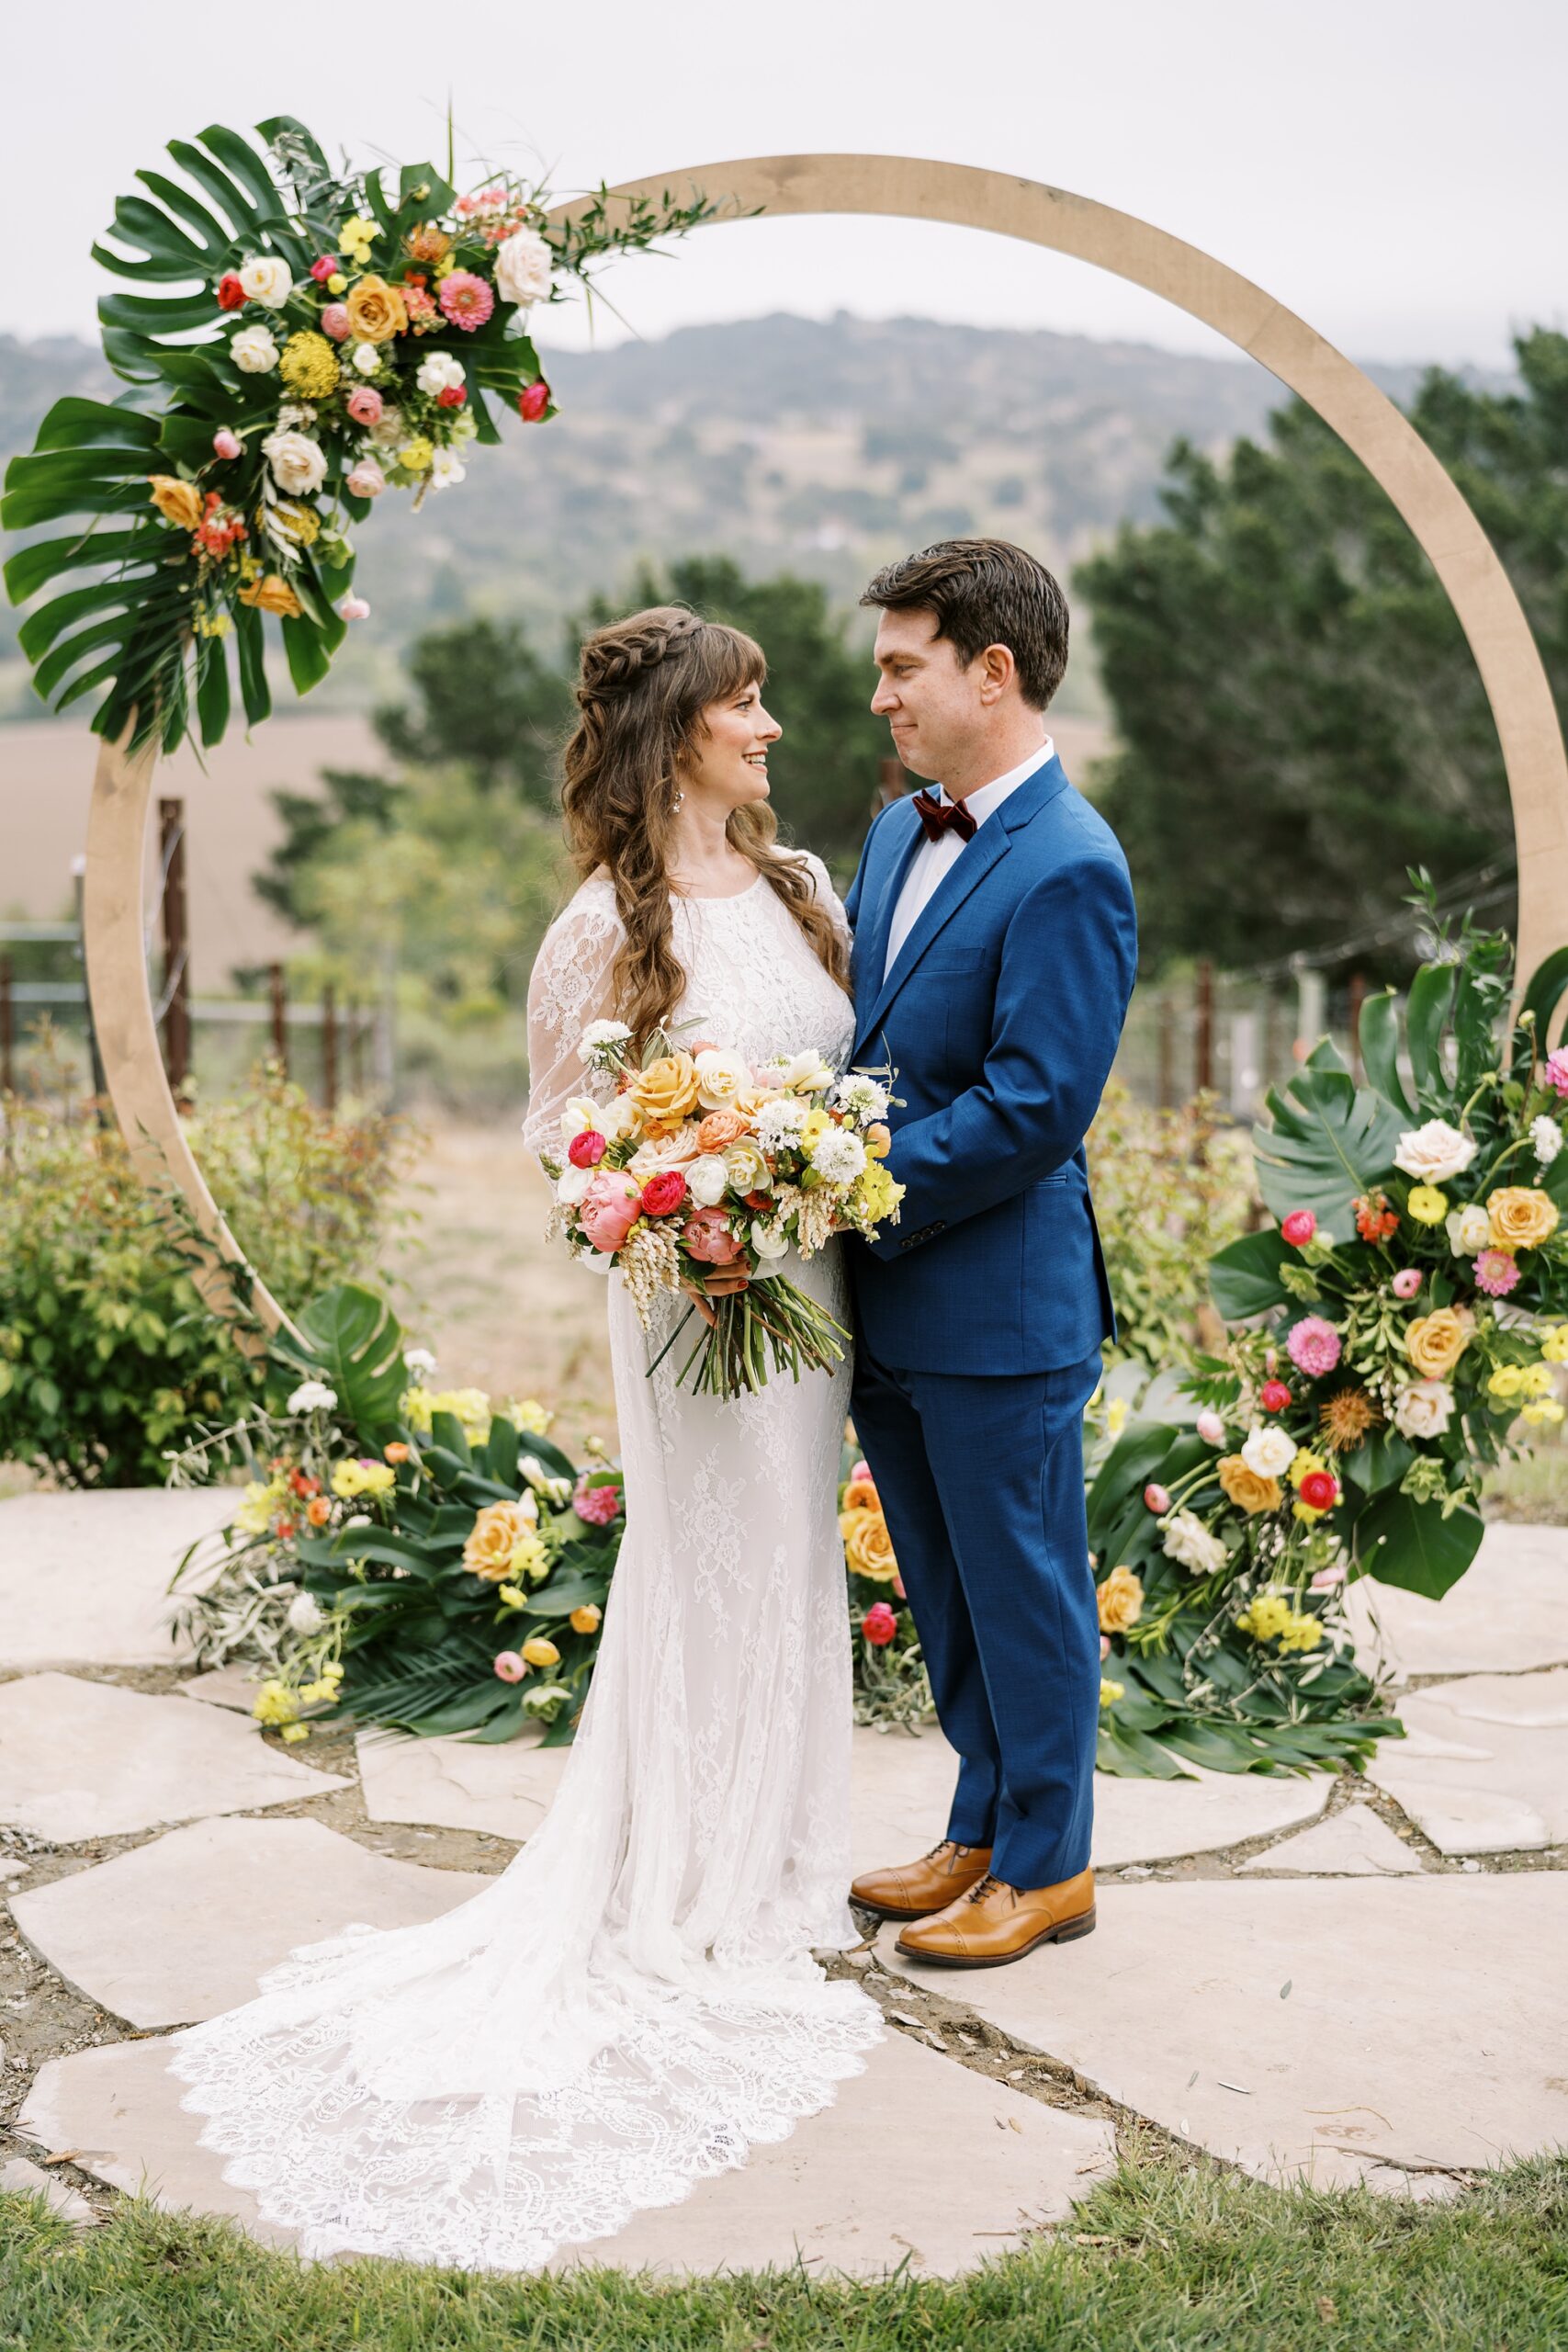 Tropical leaves and circle ceremony arbor at unique 70s vibe colorful tangerine wedding at Casitas Estate by the best san luis obispo wedding planner Janet Tacy of Tacy and co.